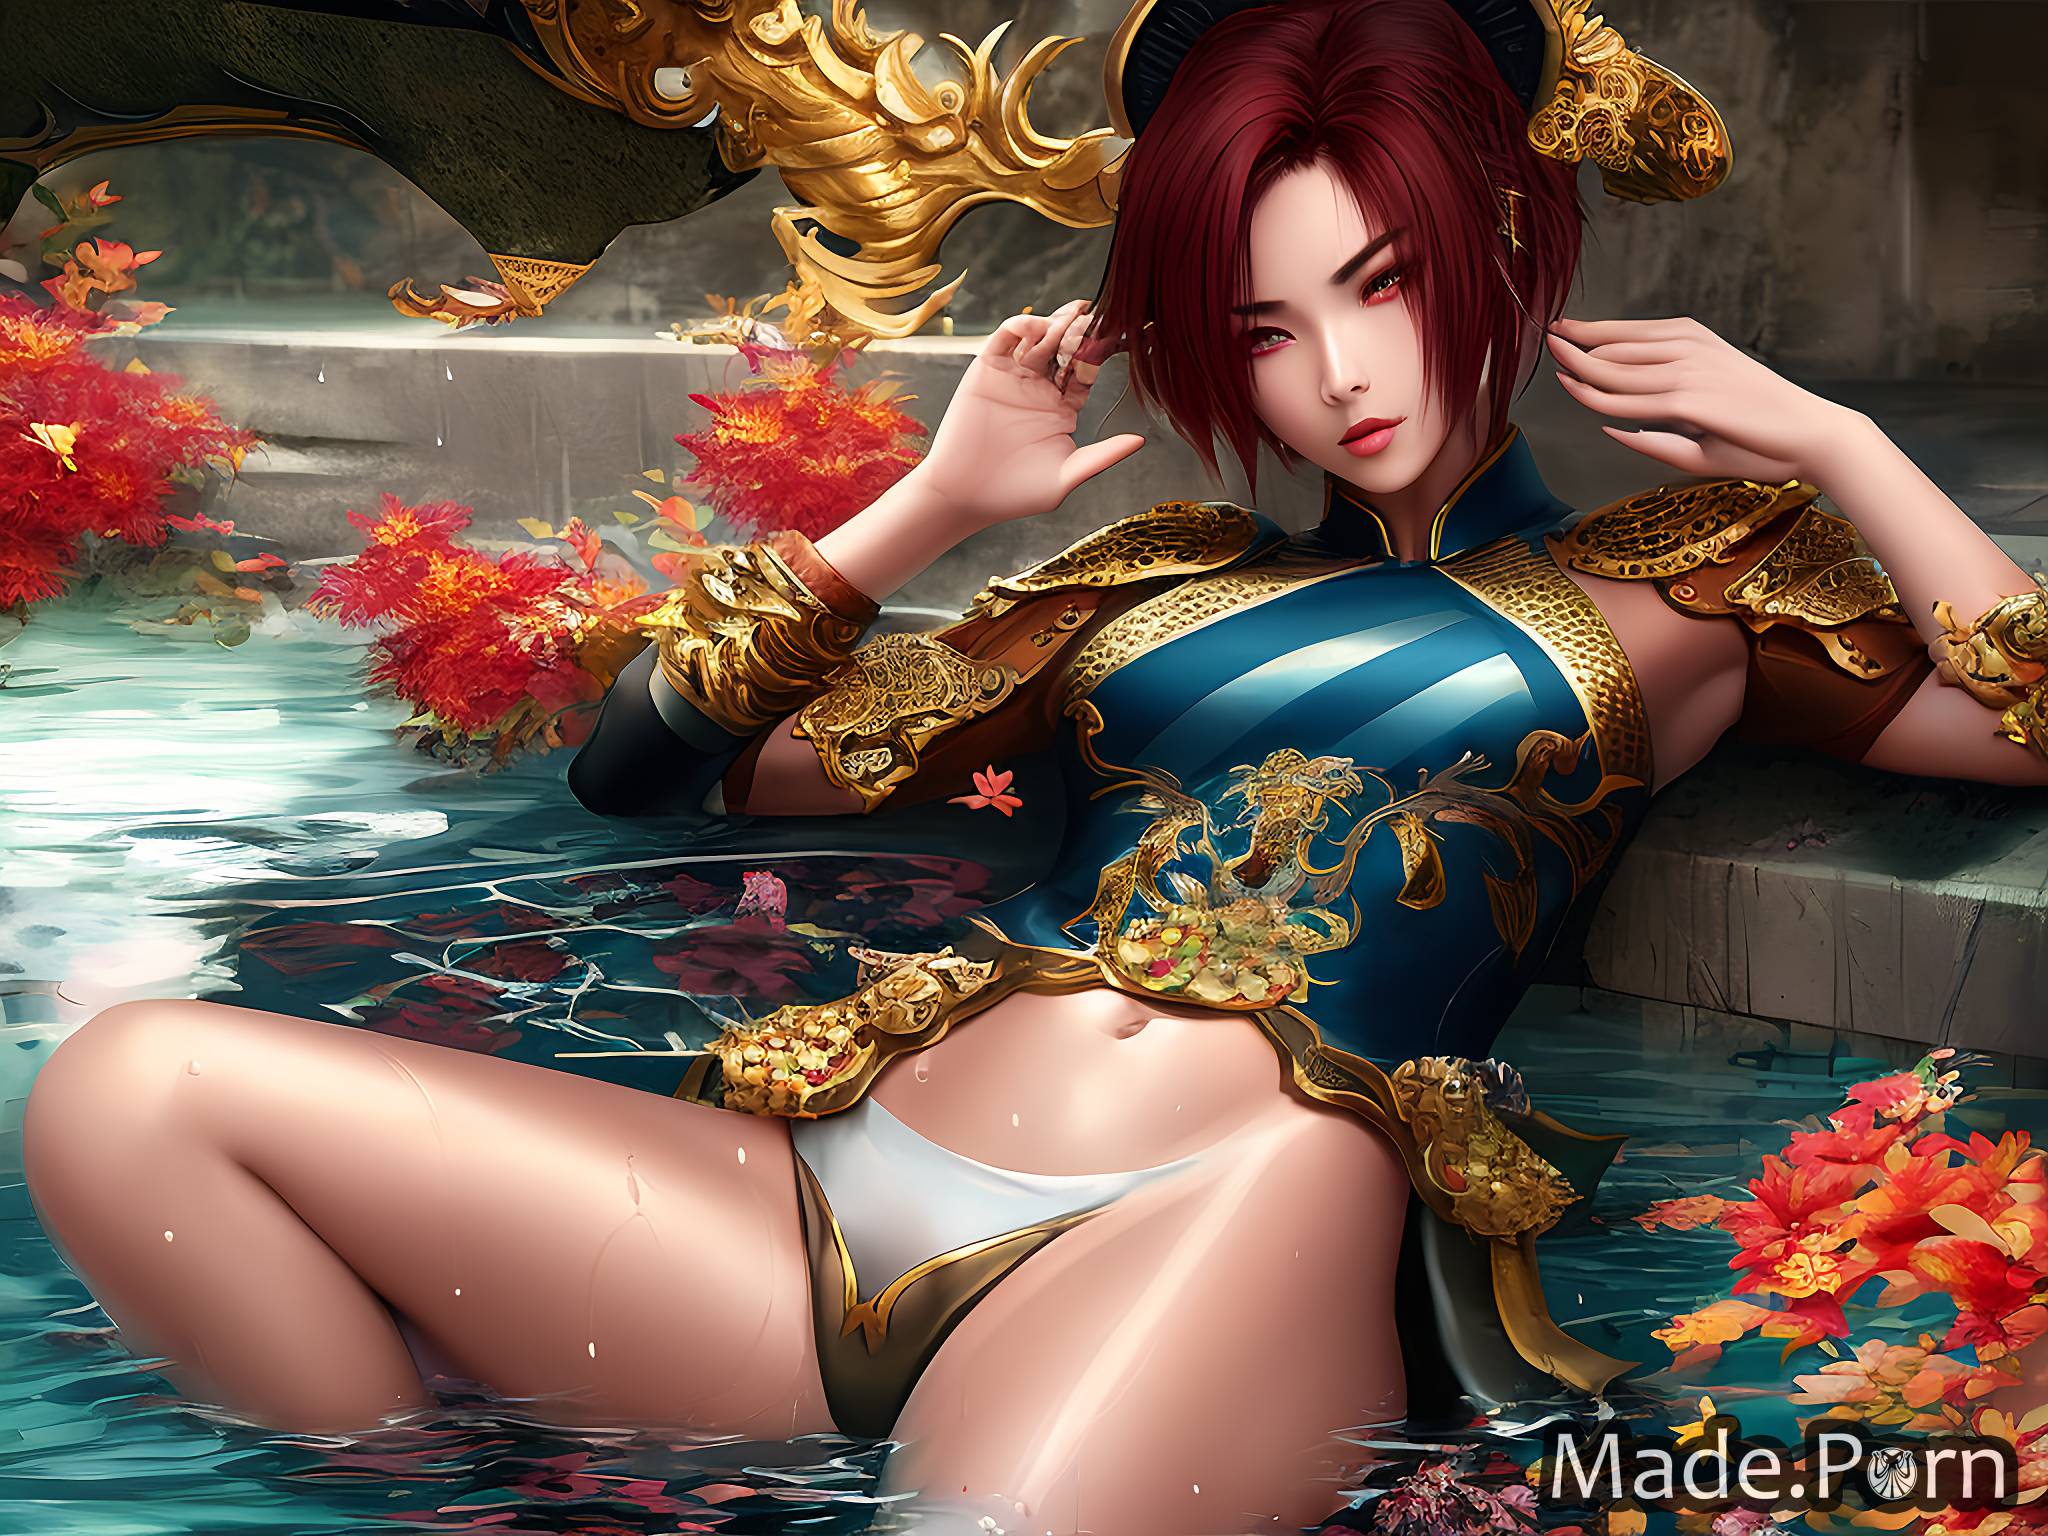 Forbidden Art Porn - Porn image of fantasy armor wet oiled body perfect body digital art  Forbidden City, China pool created by AI